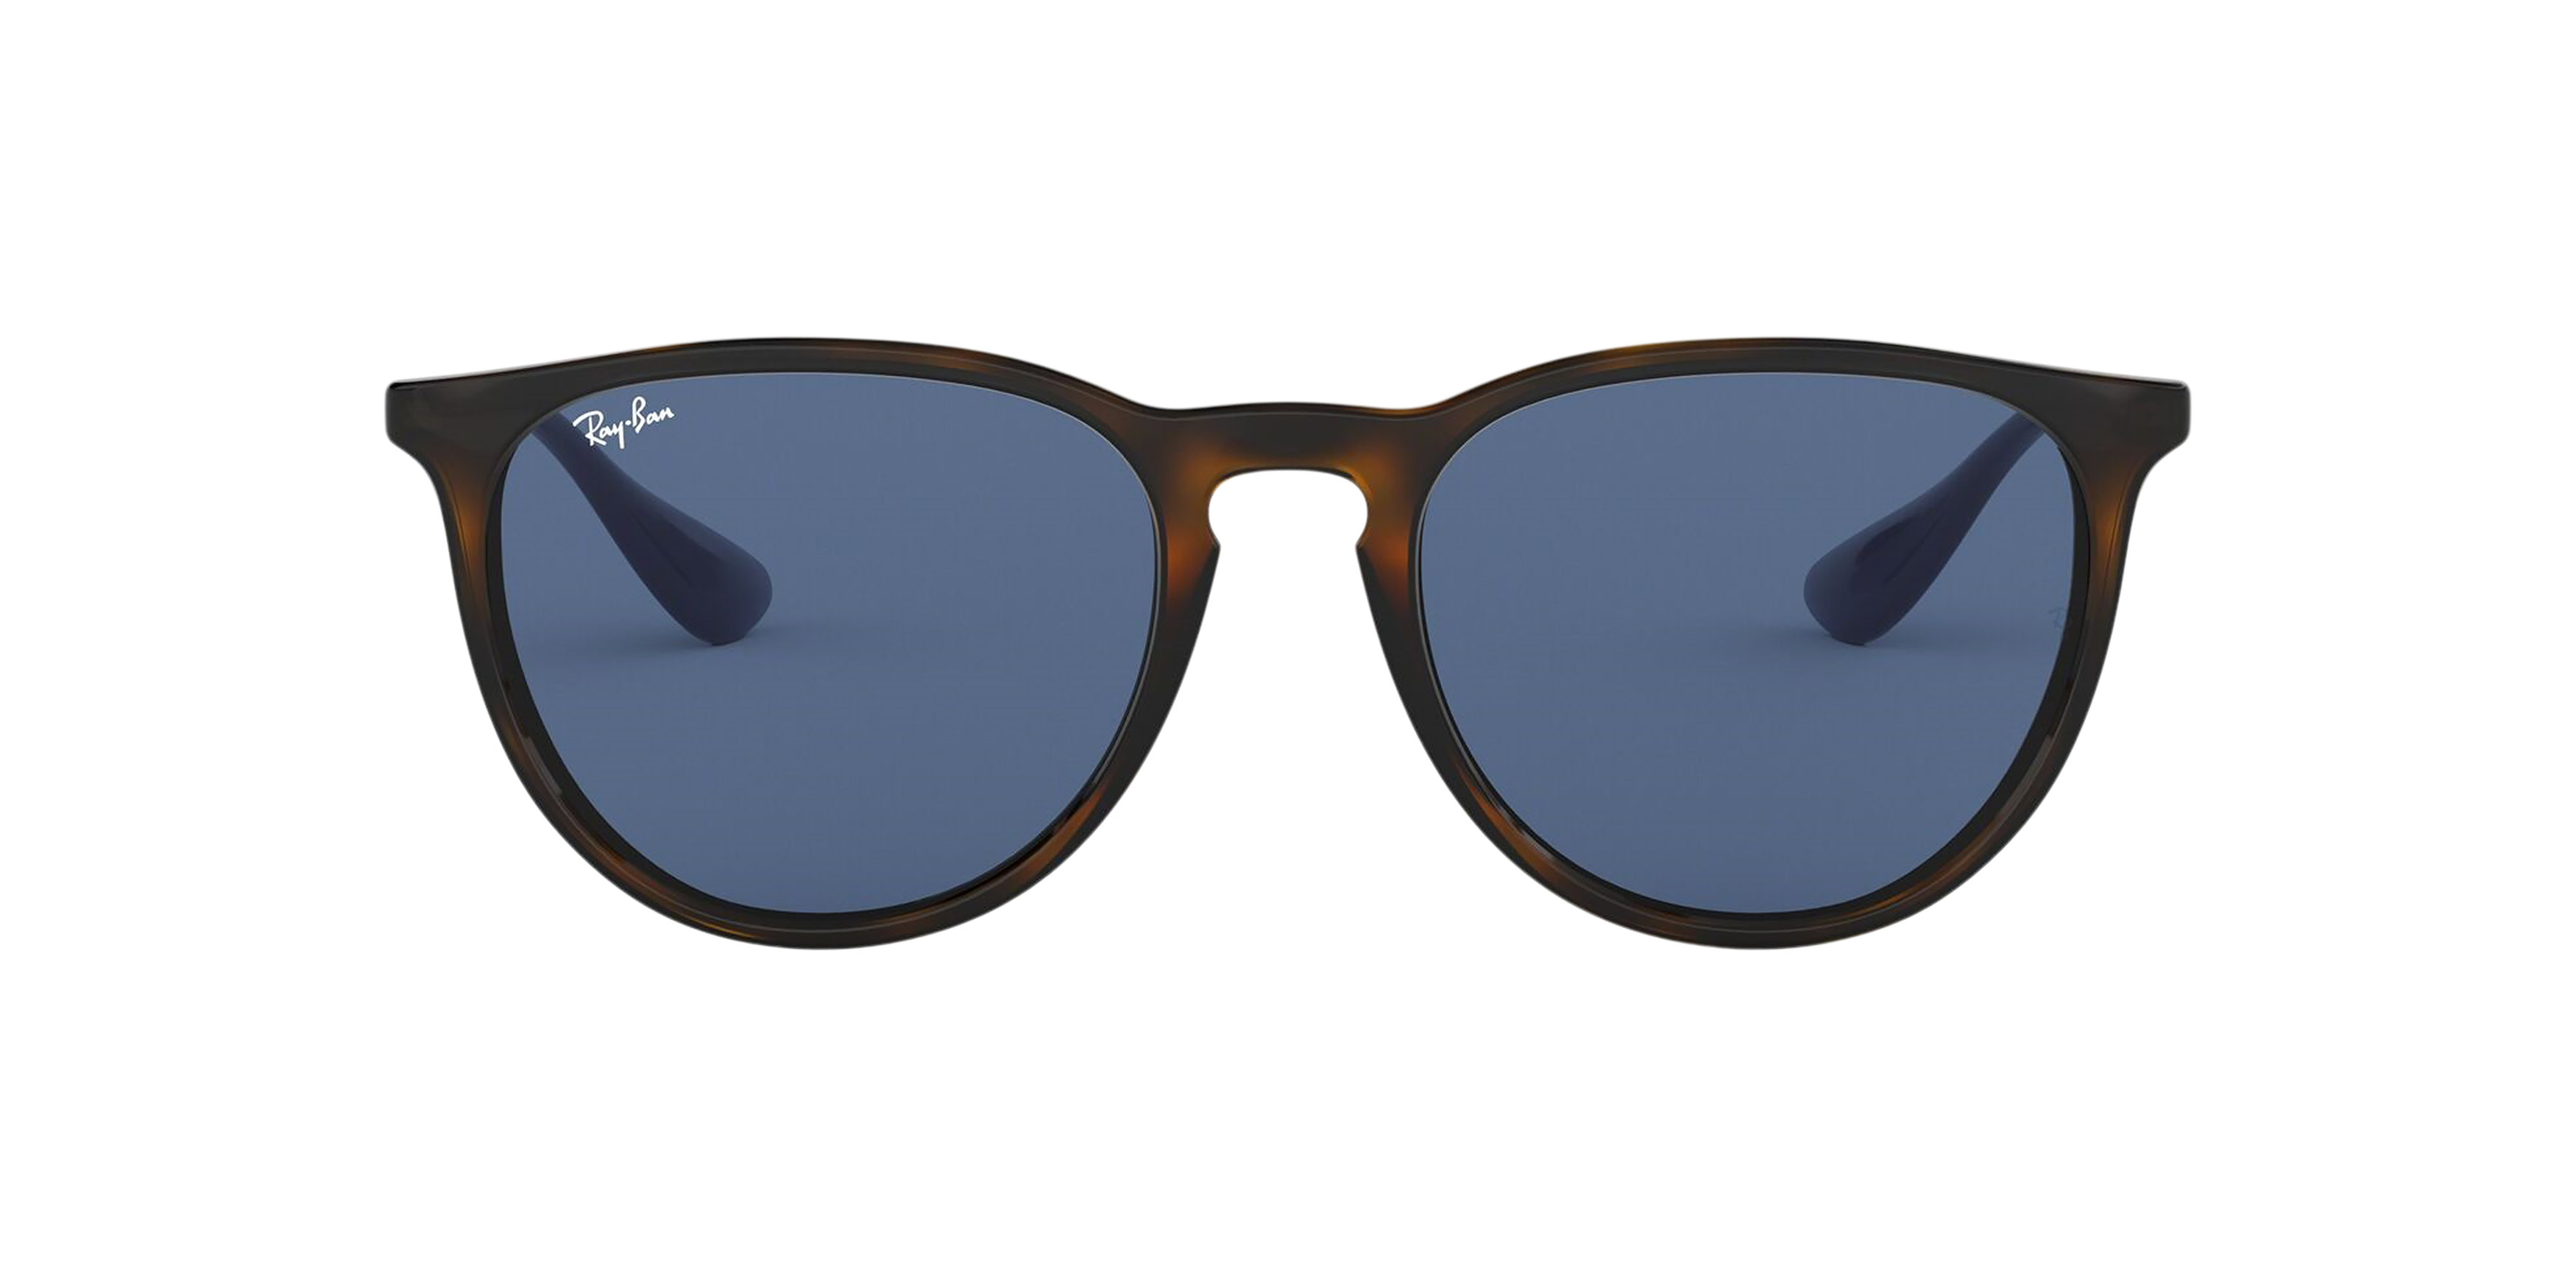 [products.image.front] RAY-BAN RB4171 639080